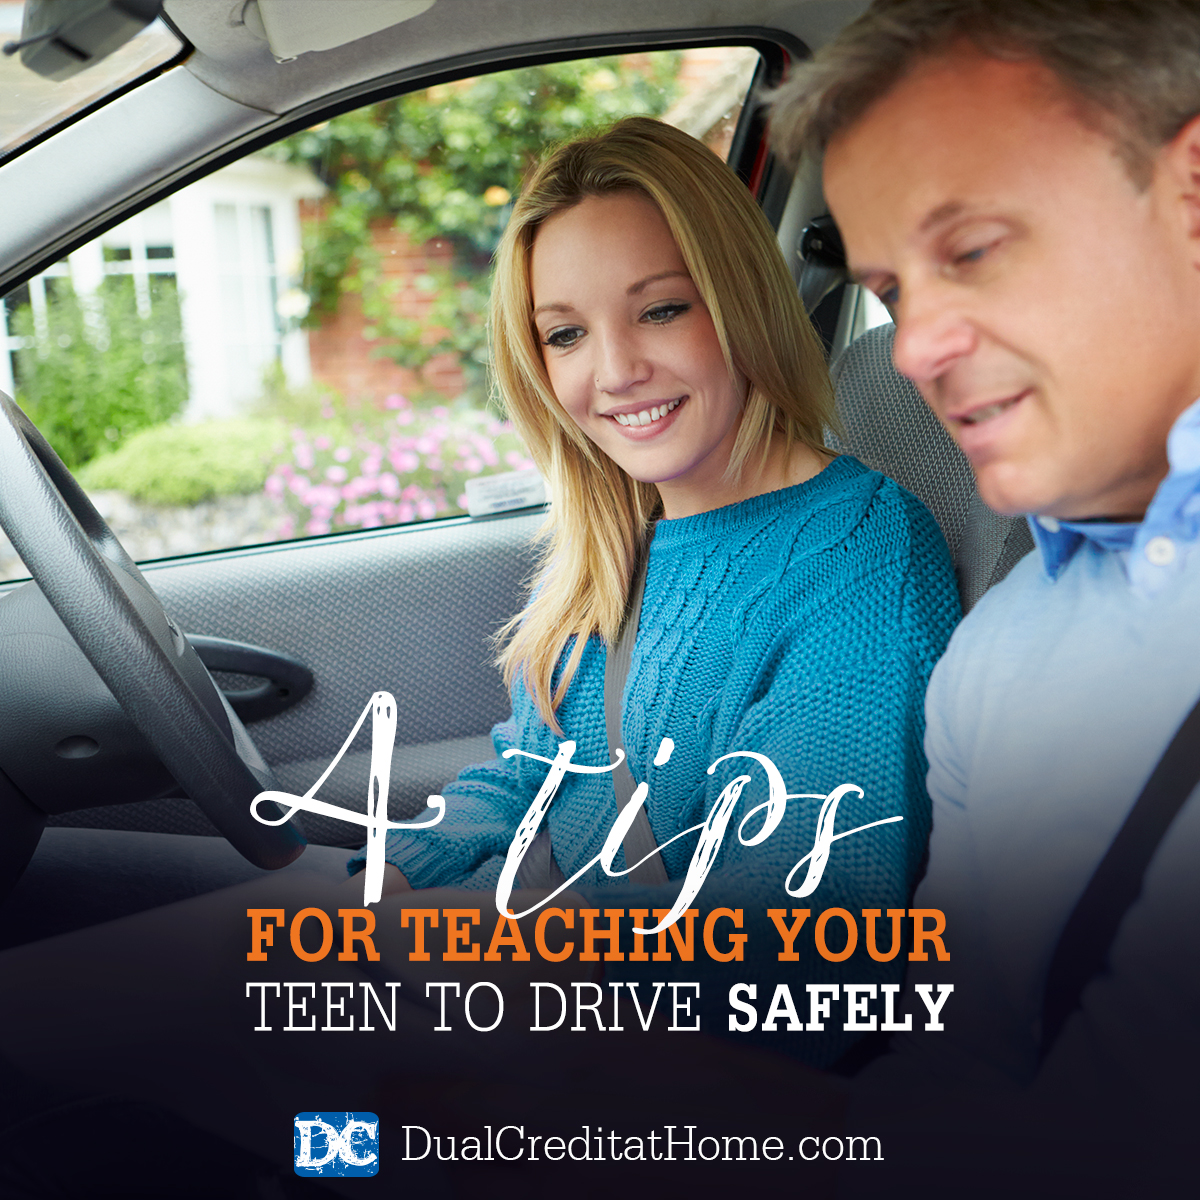 4 Tips for Teaching Your Teen to Drive Safely